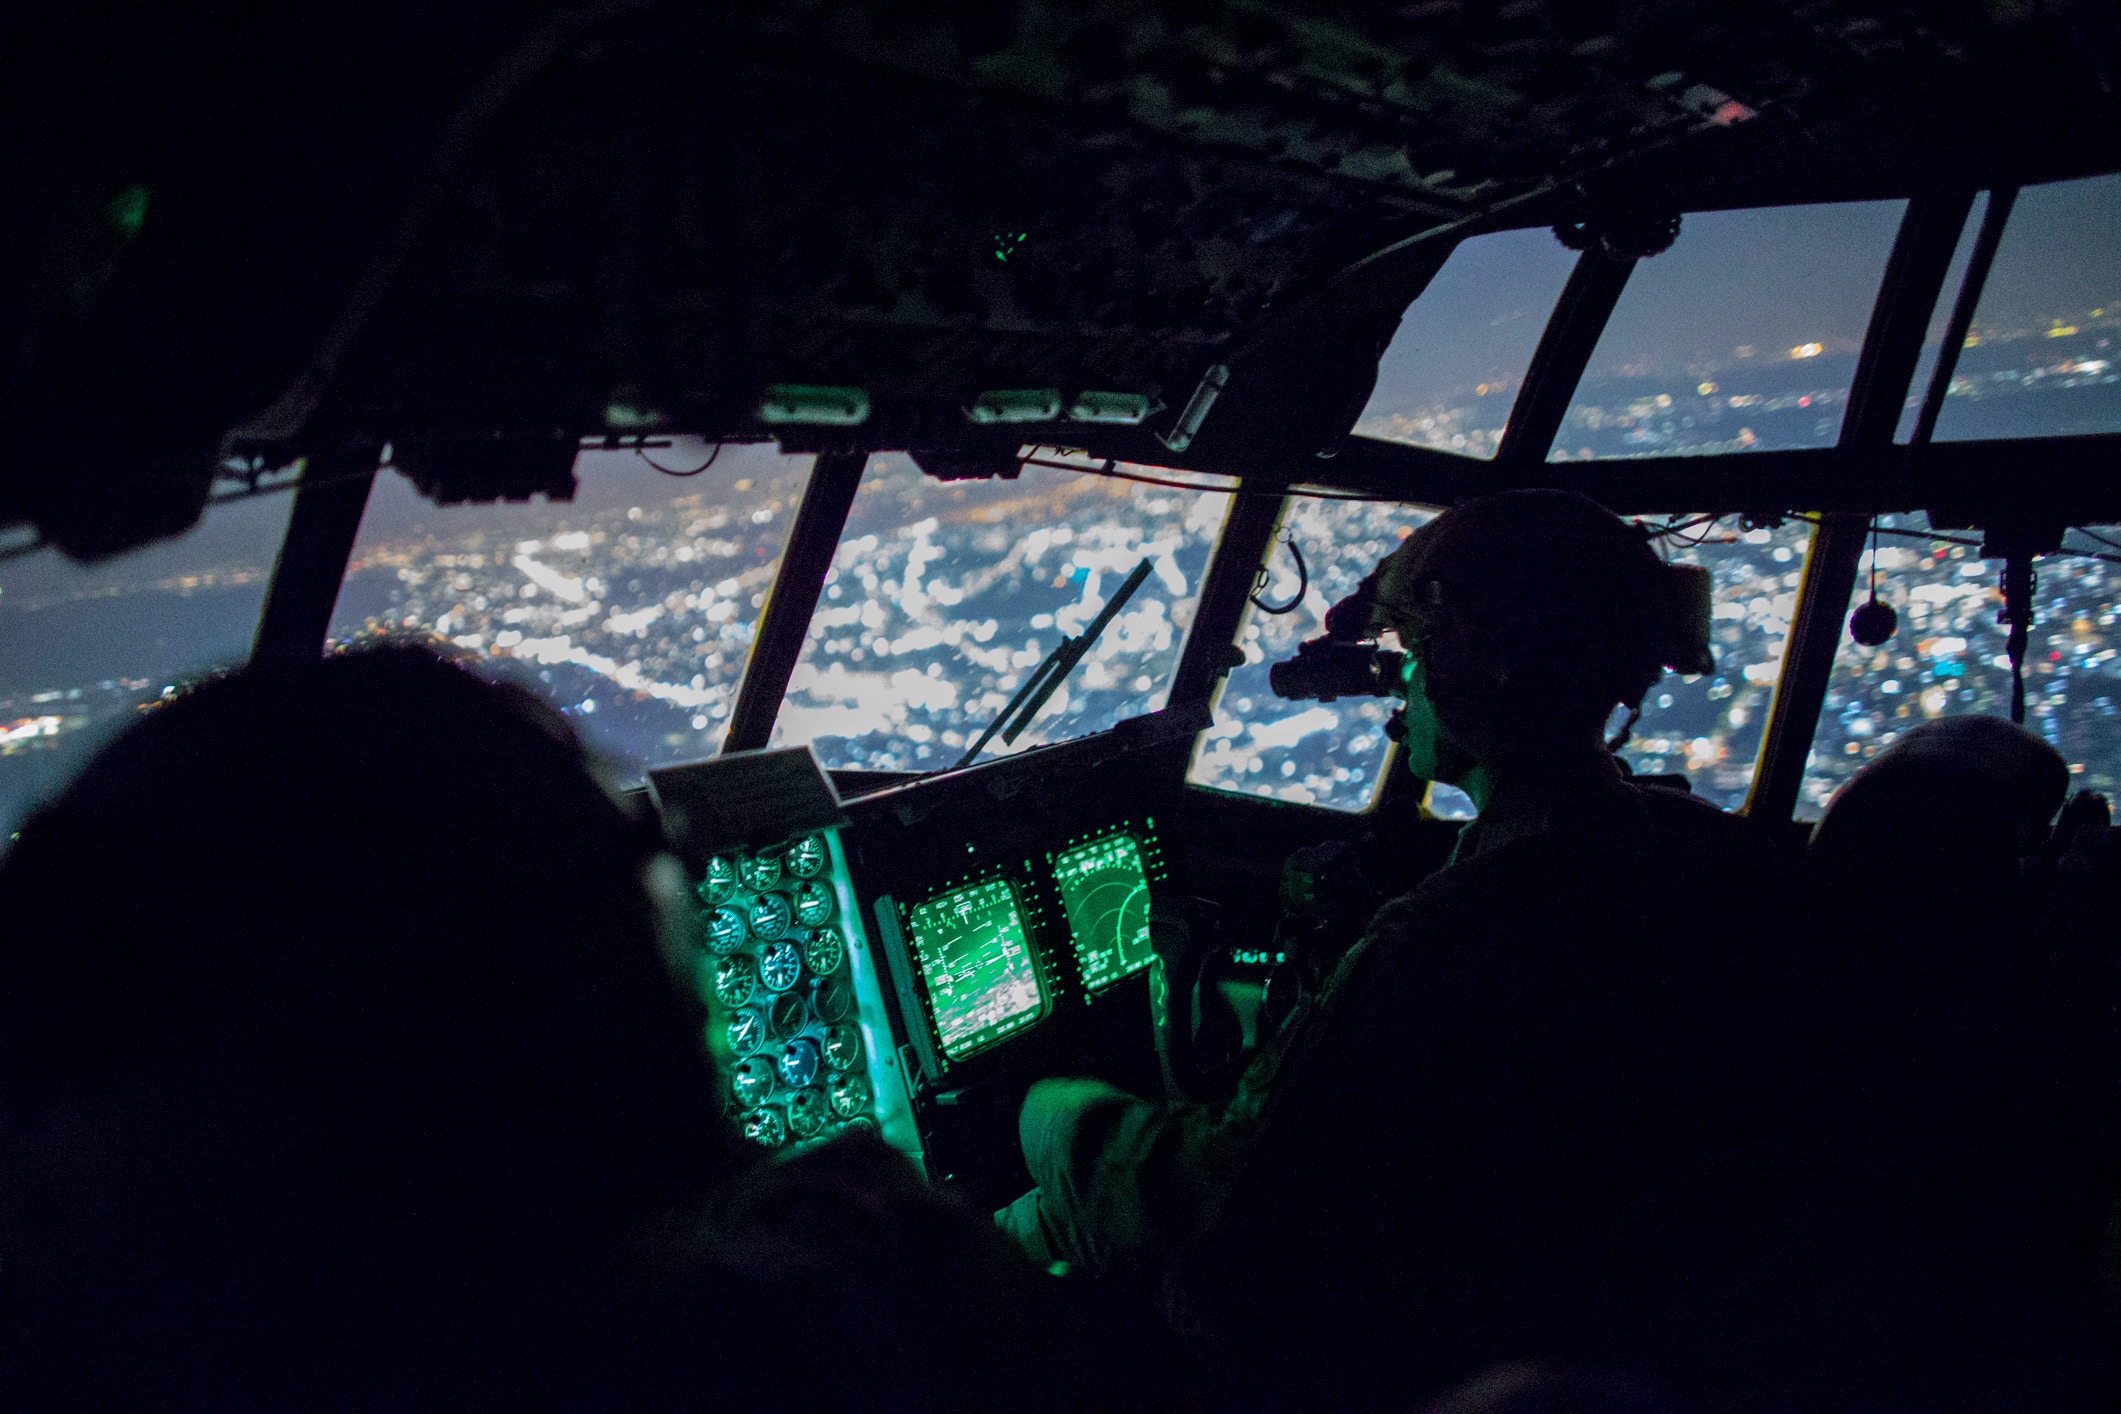 U.S. Air Force MC-130H Combat Talon II crew members from the 353rd Special Operations Group fly over the Kanto Plain, Japan, June 19, 2017, during Exercise Teak Jet. Exercise Teak Jet is a joint combined exchange training (JCET) focused on improving interoperability between U.S. Air Force and Japan Air Self-Defense Force. (U.S. Air Force photo by Yasuo Osakabe)